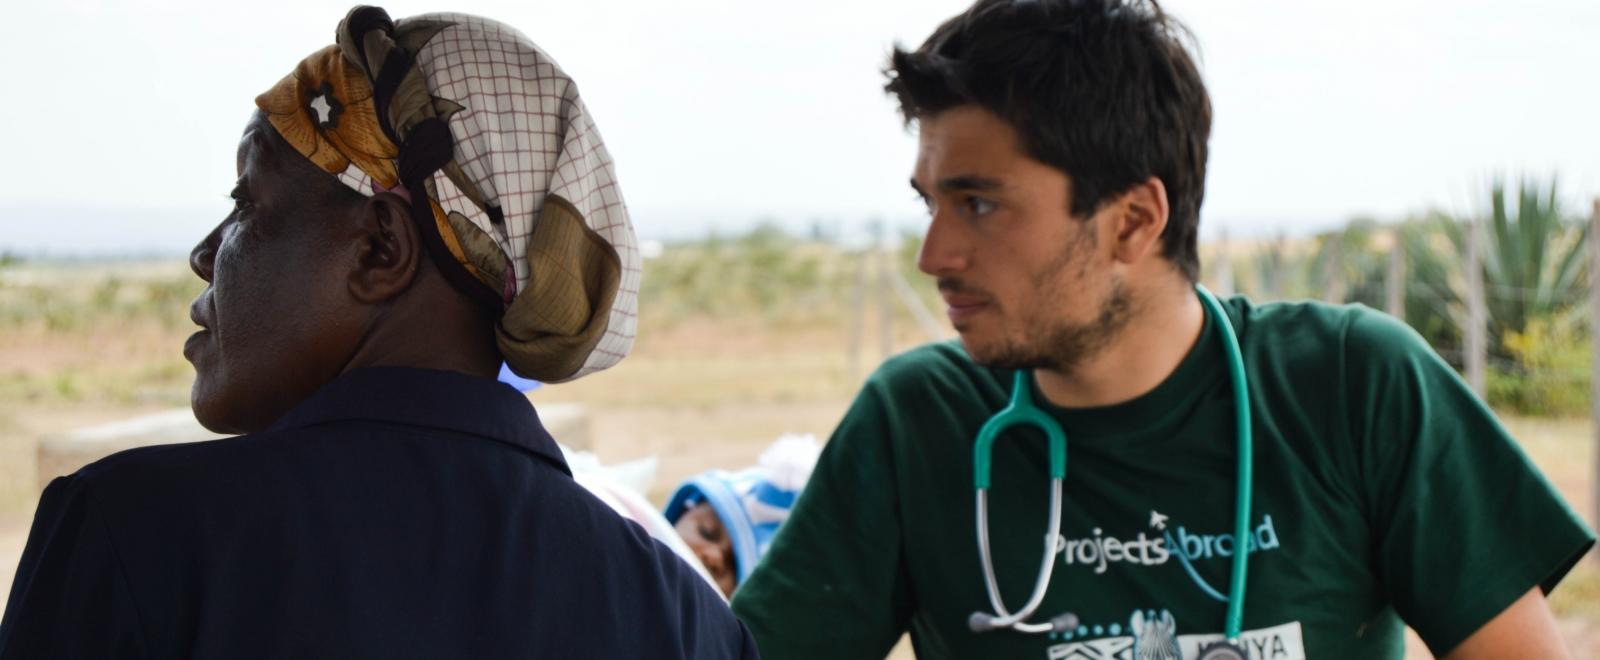 Projects Abroad male intern waits to examine patients at a medical outreach in Kenya. 